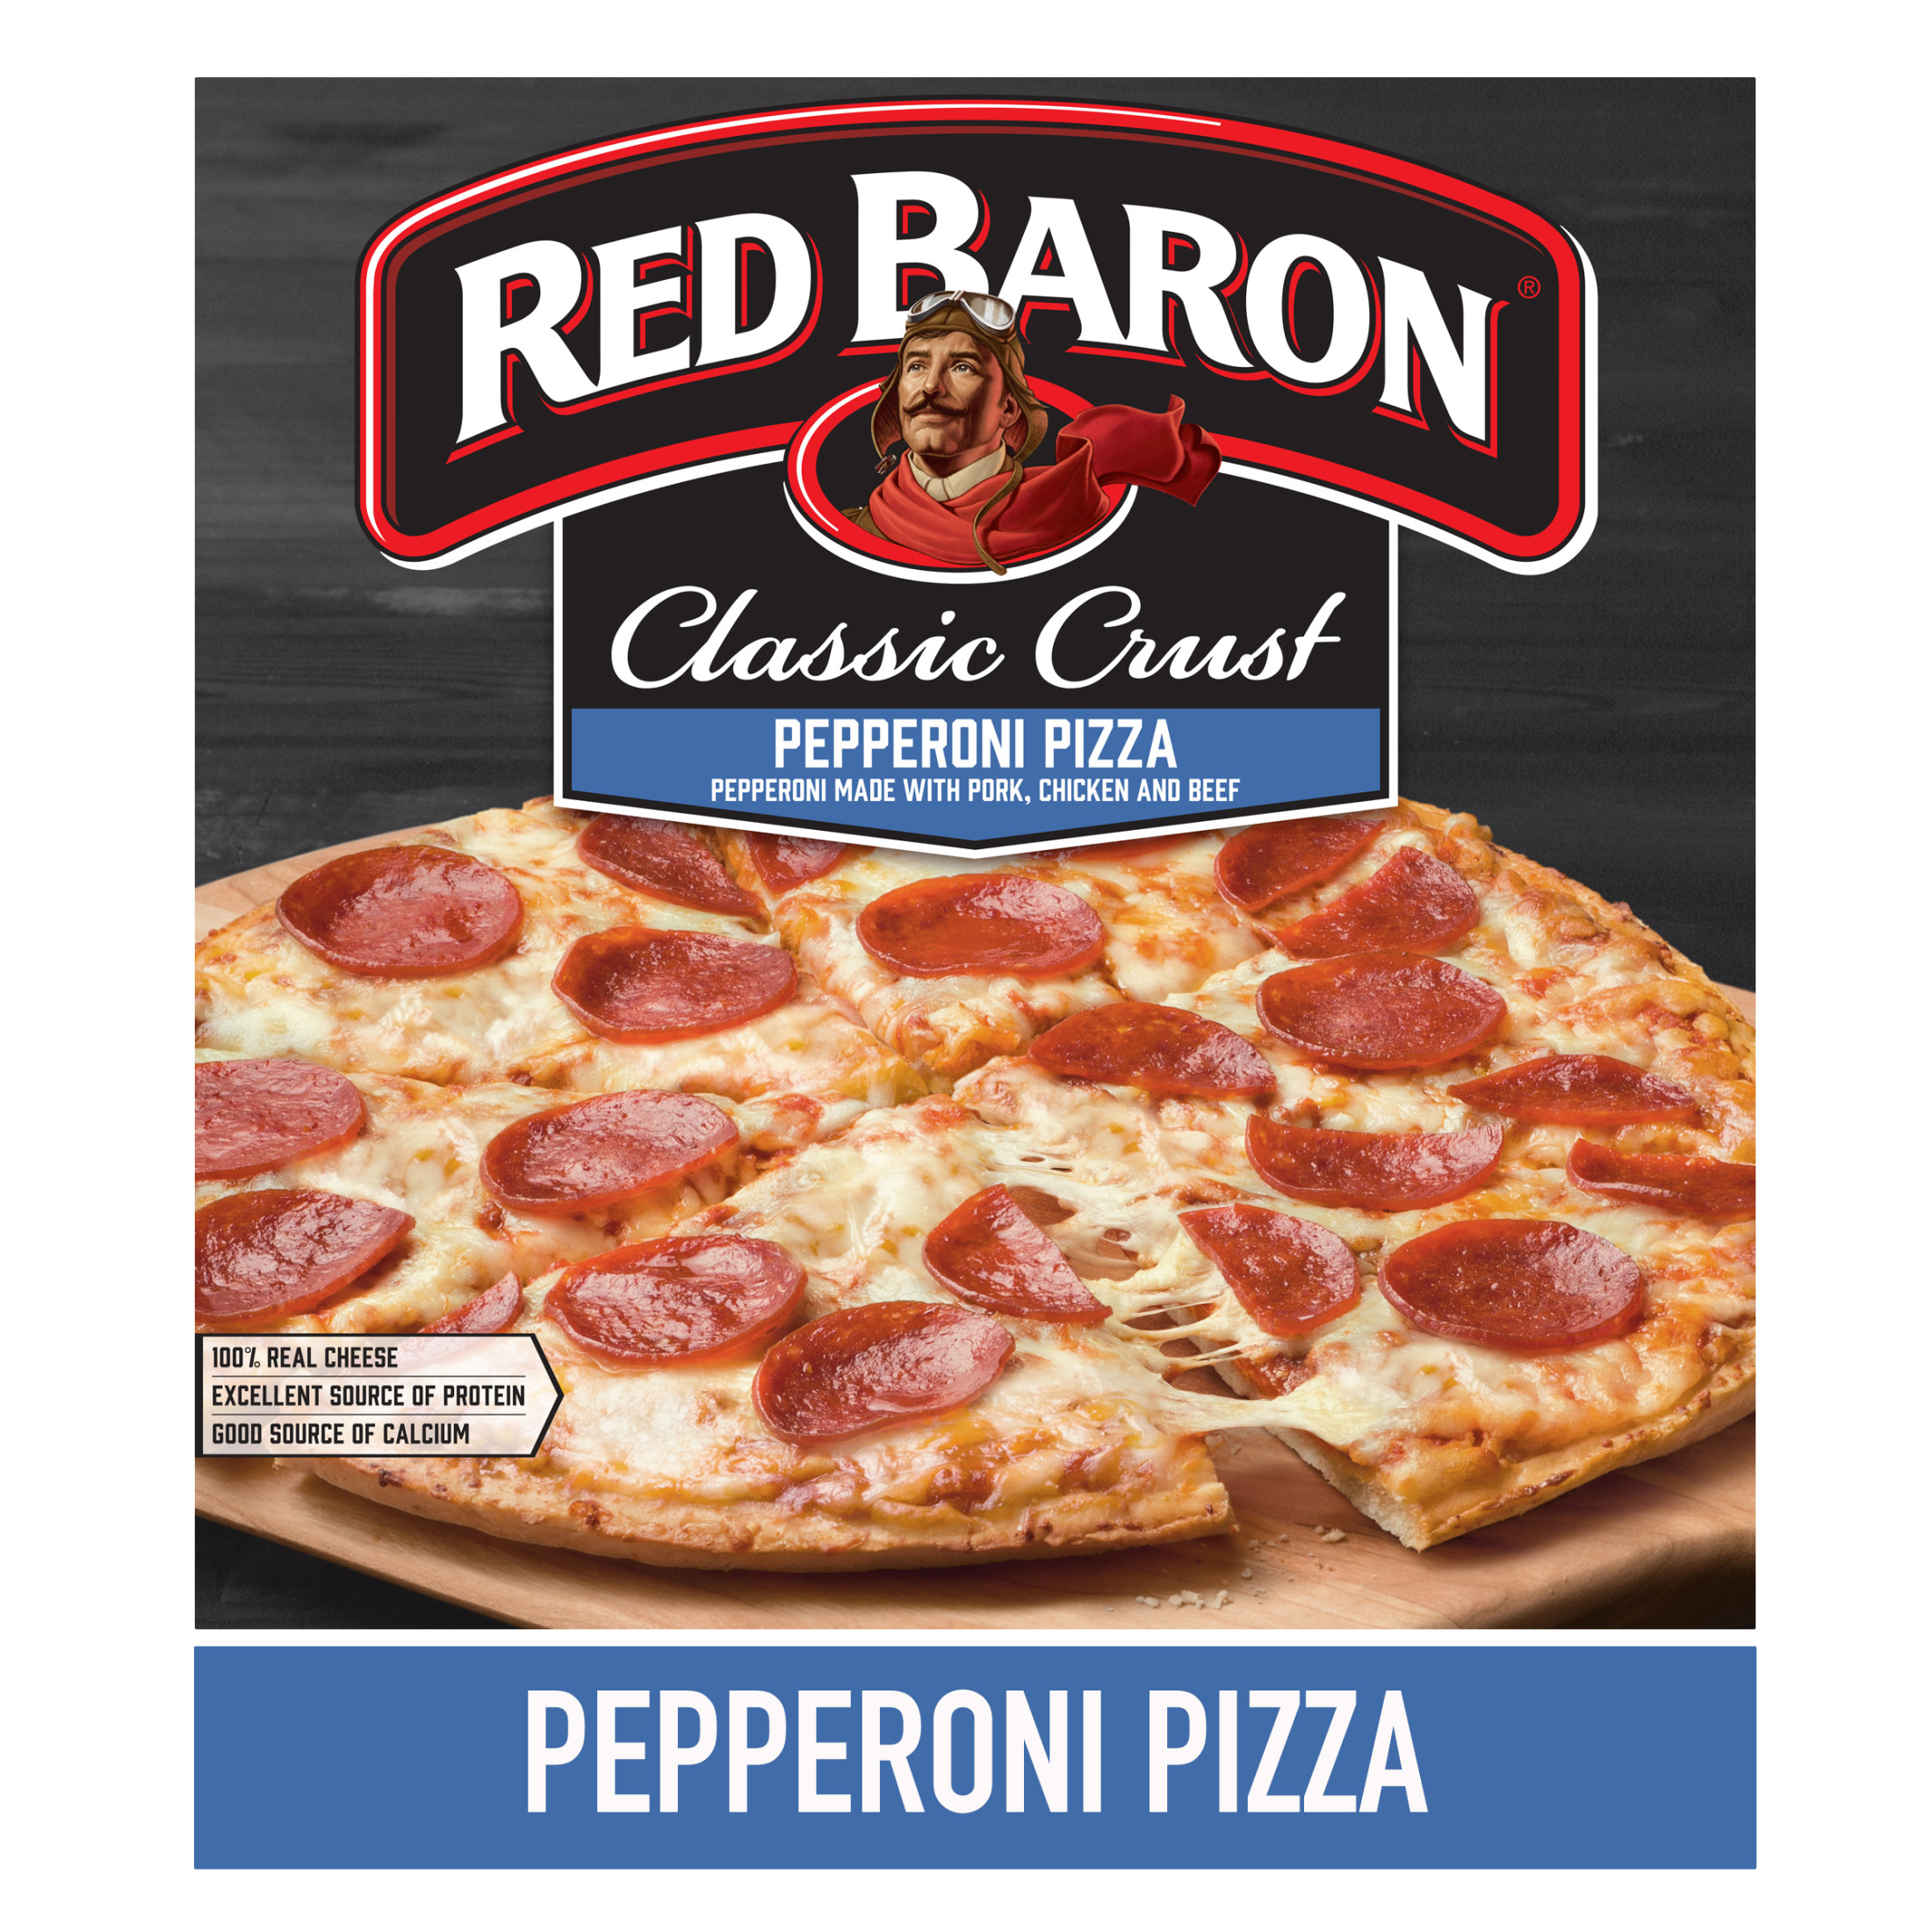 Red Baron Frozen Pizza Classic Crust Pepperoni, 20.61 oz - image 3 of 14